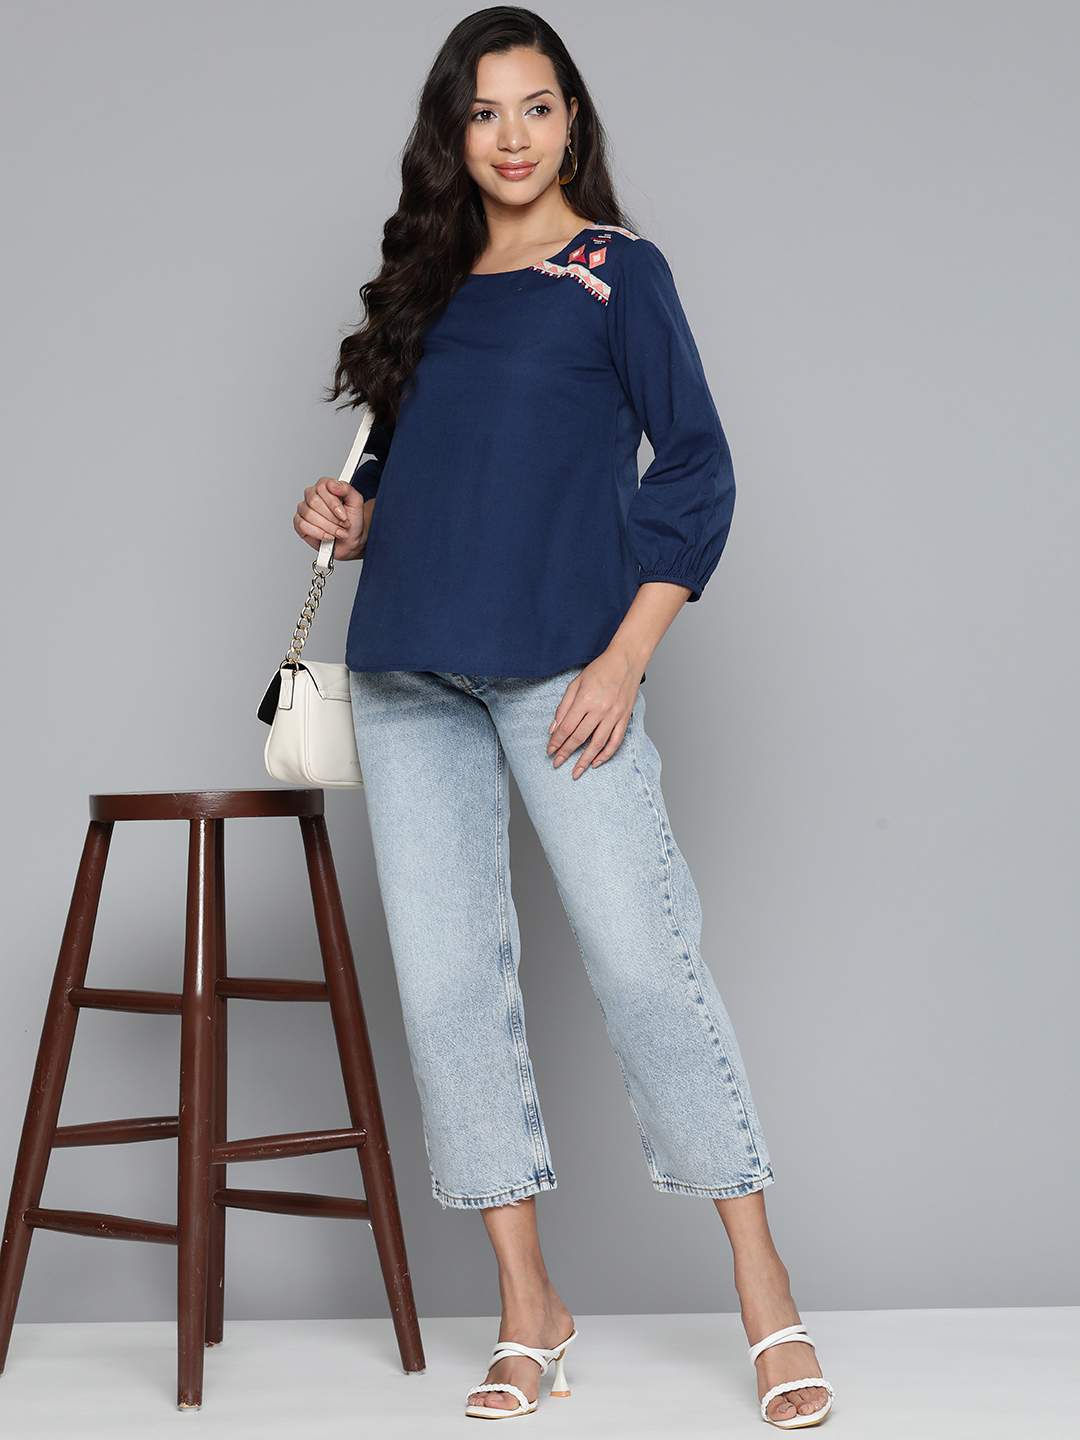 Embroidered blue top